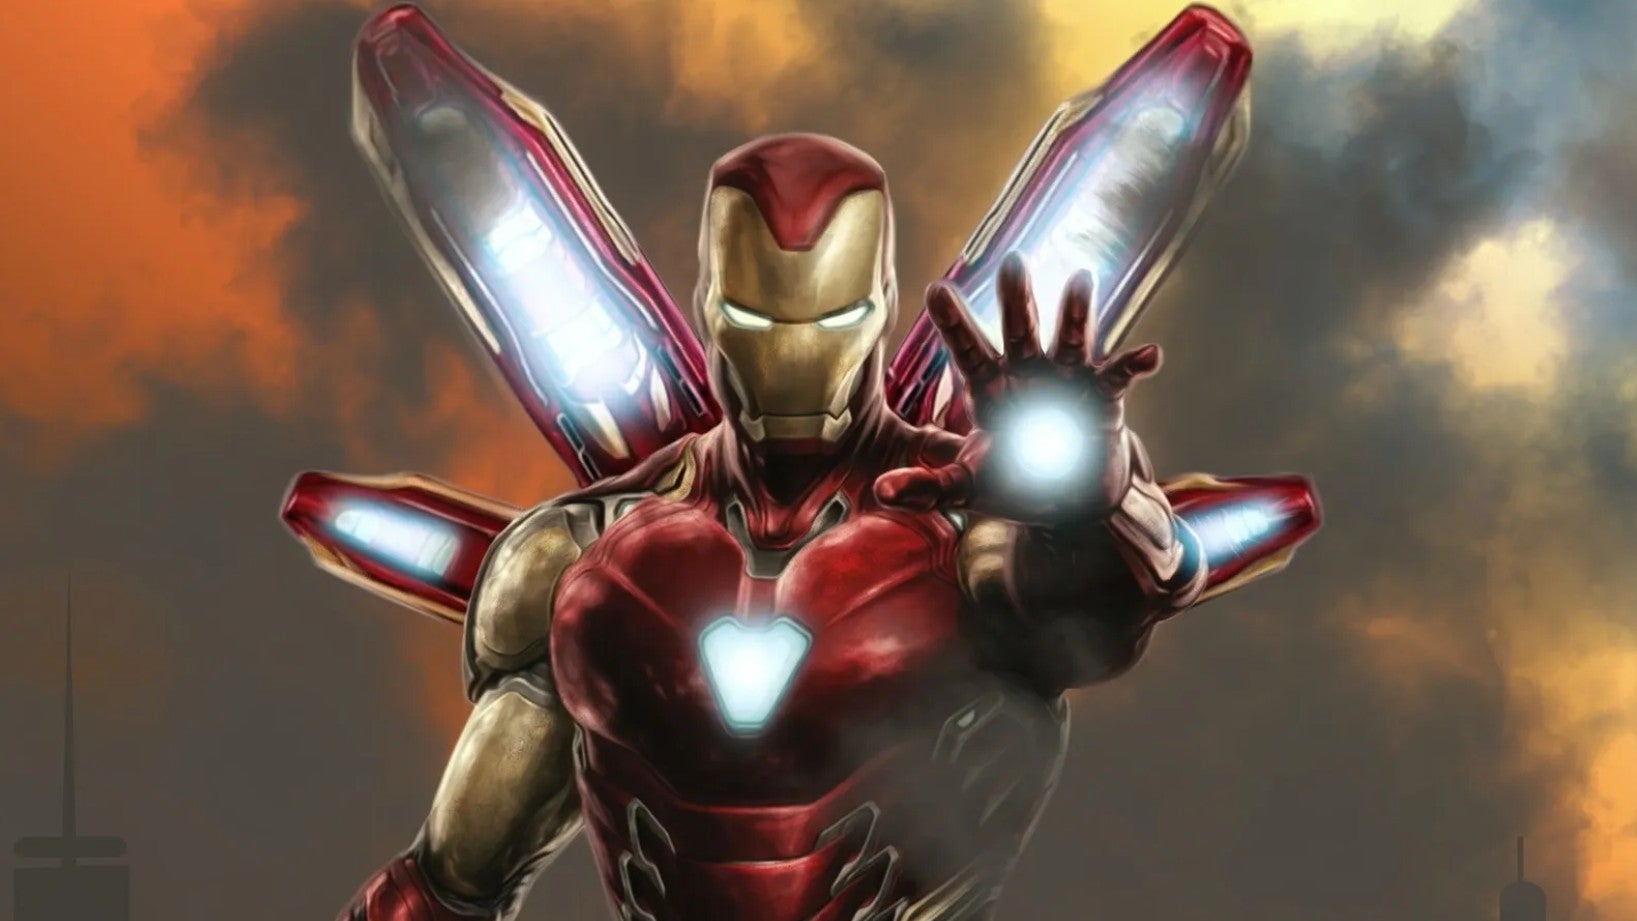 Image for Rumours suggest new Iron Man game coming from EA